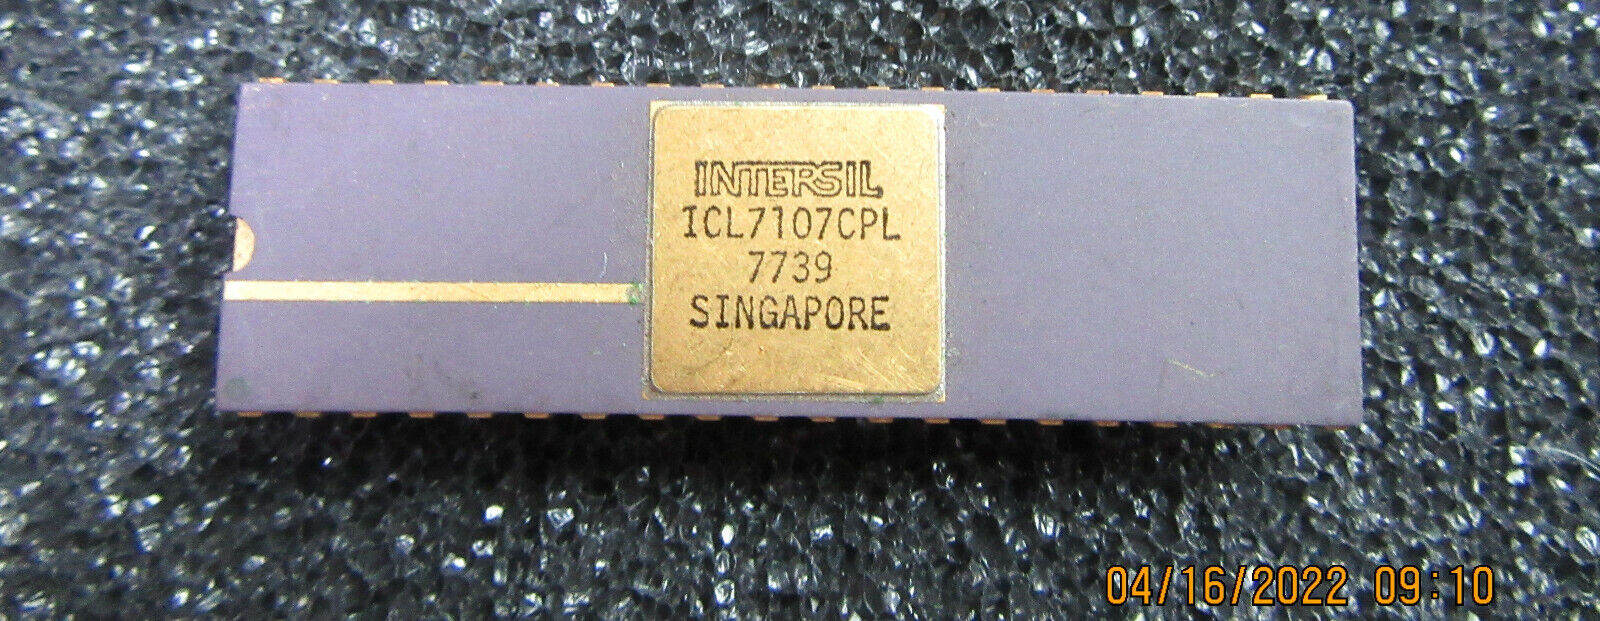 Genuine Vintage Very Rare Collectable Intersil ICL7107CPL Ceramic Gold IC